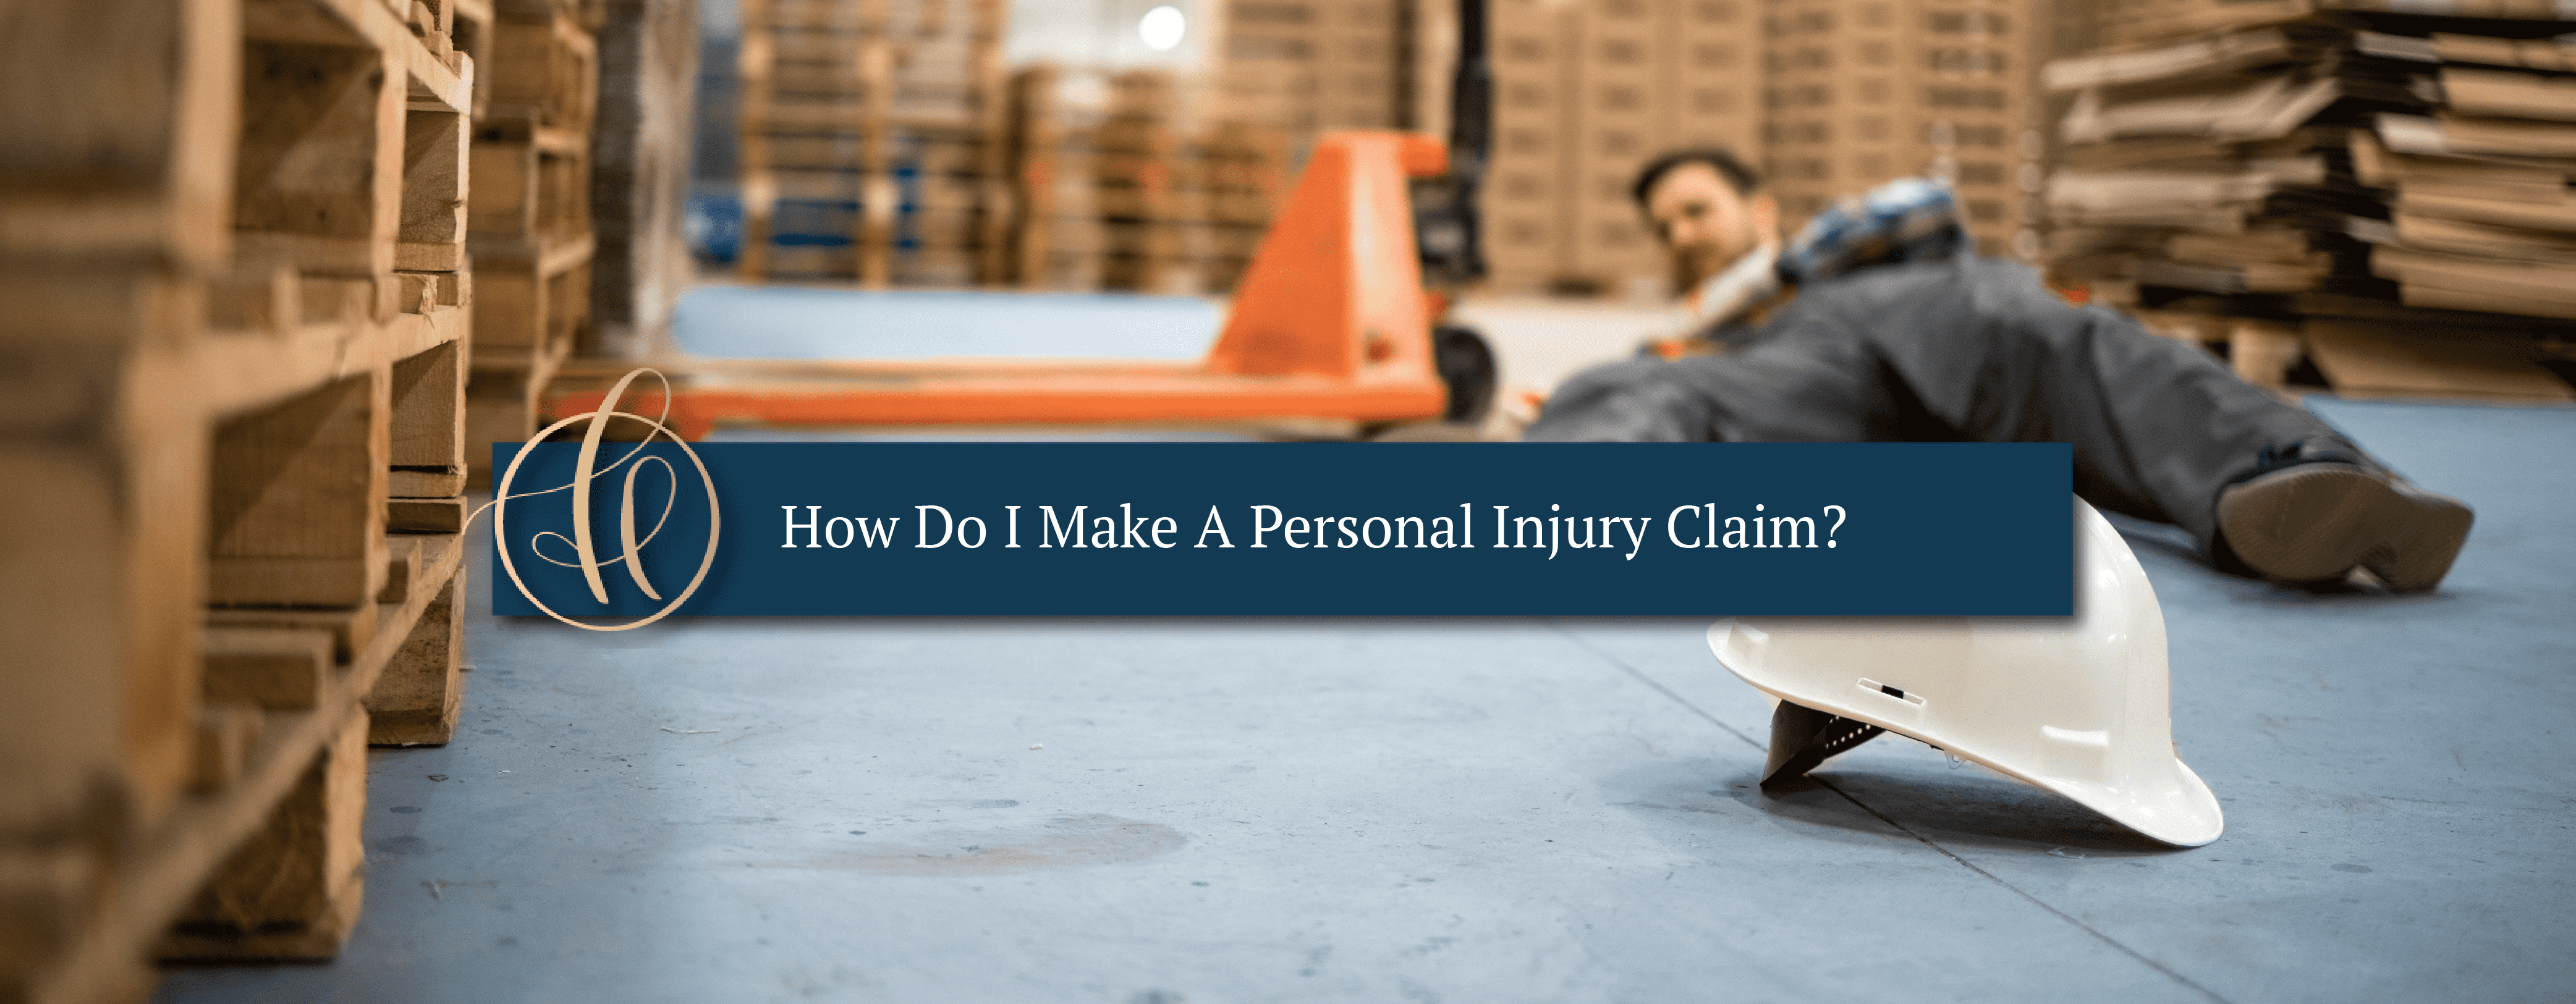 Making a Personal Injury* Claim: Step by Step